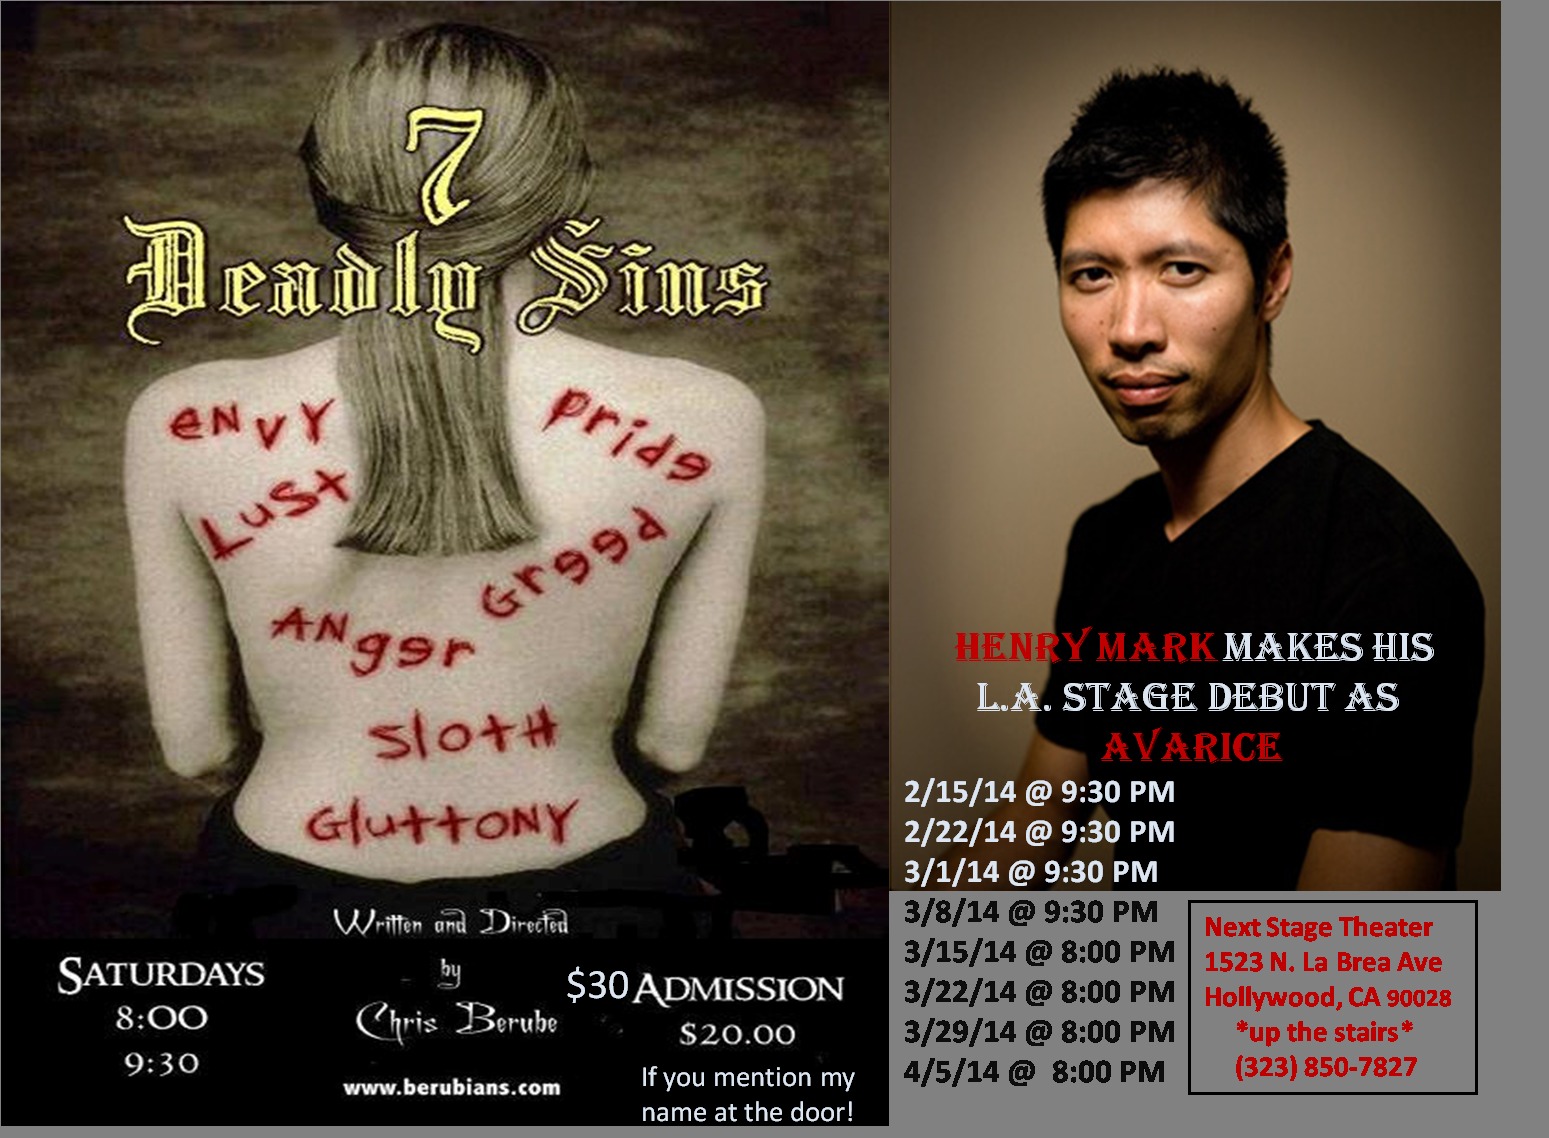 Postcard for 7 DEADLY SINS, a stage play I am performing in at Next Stage Theater. Come by and check it out!